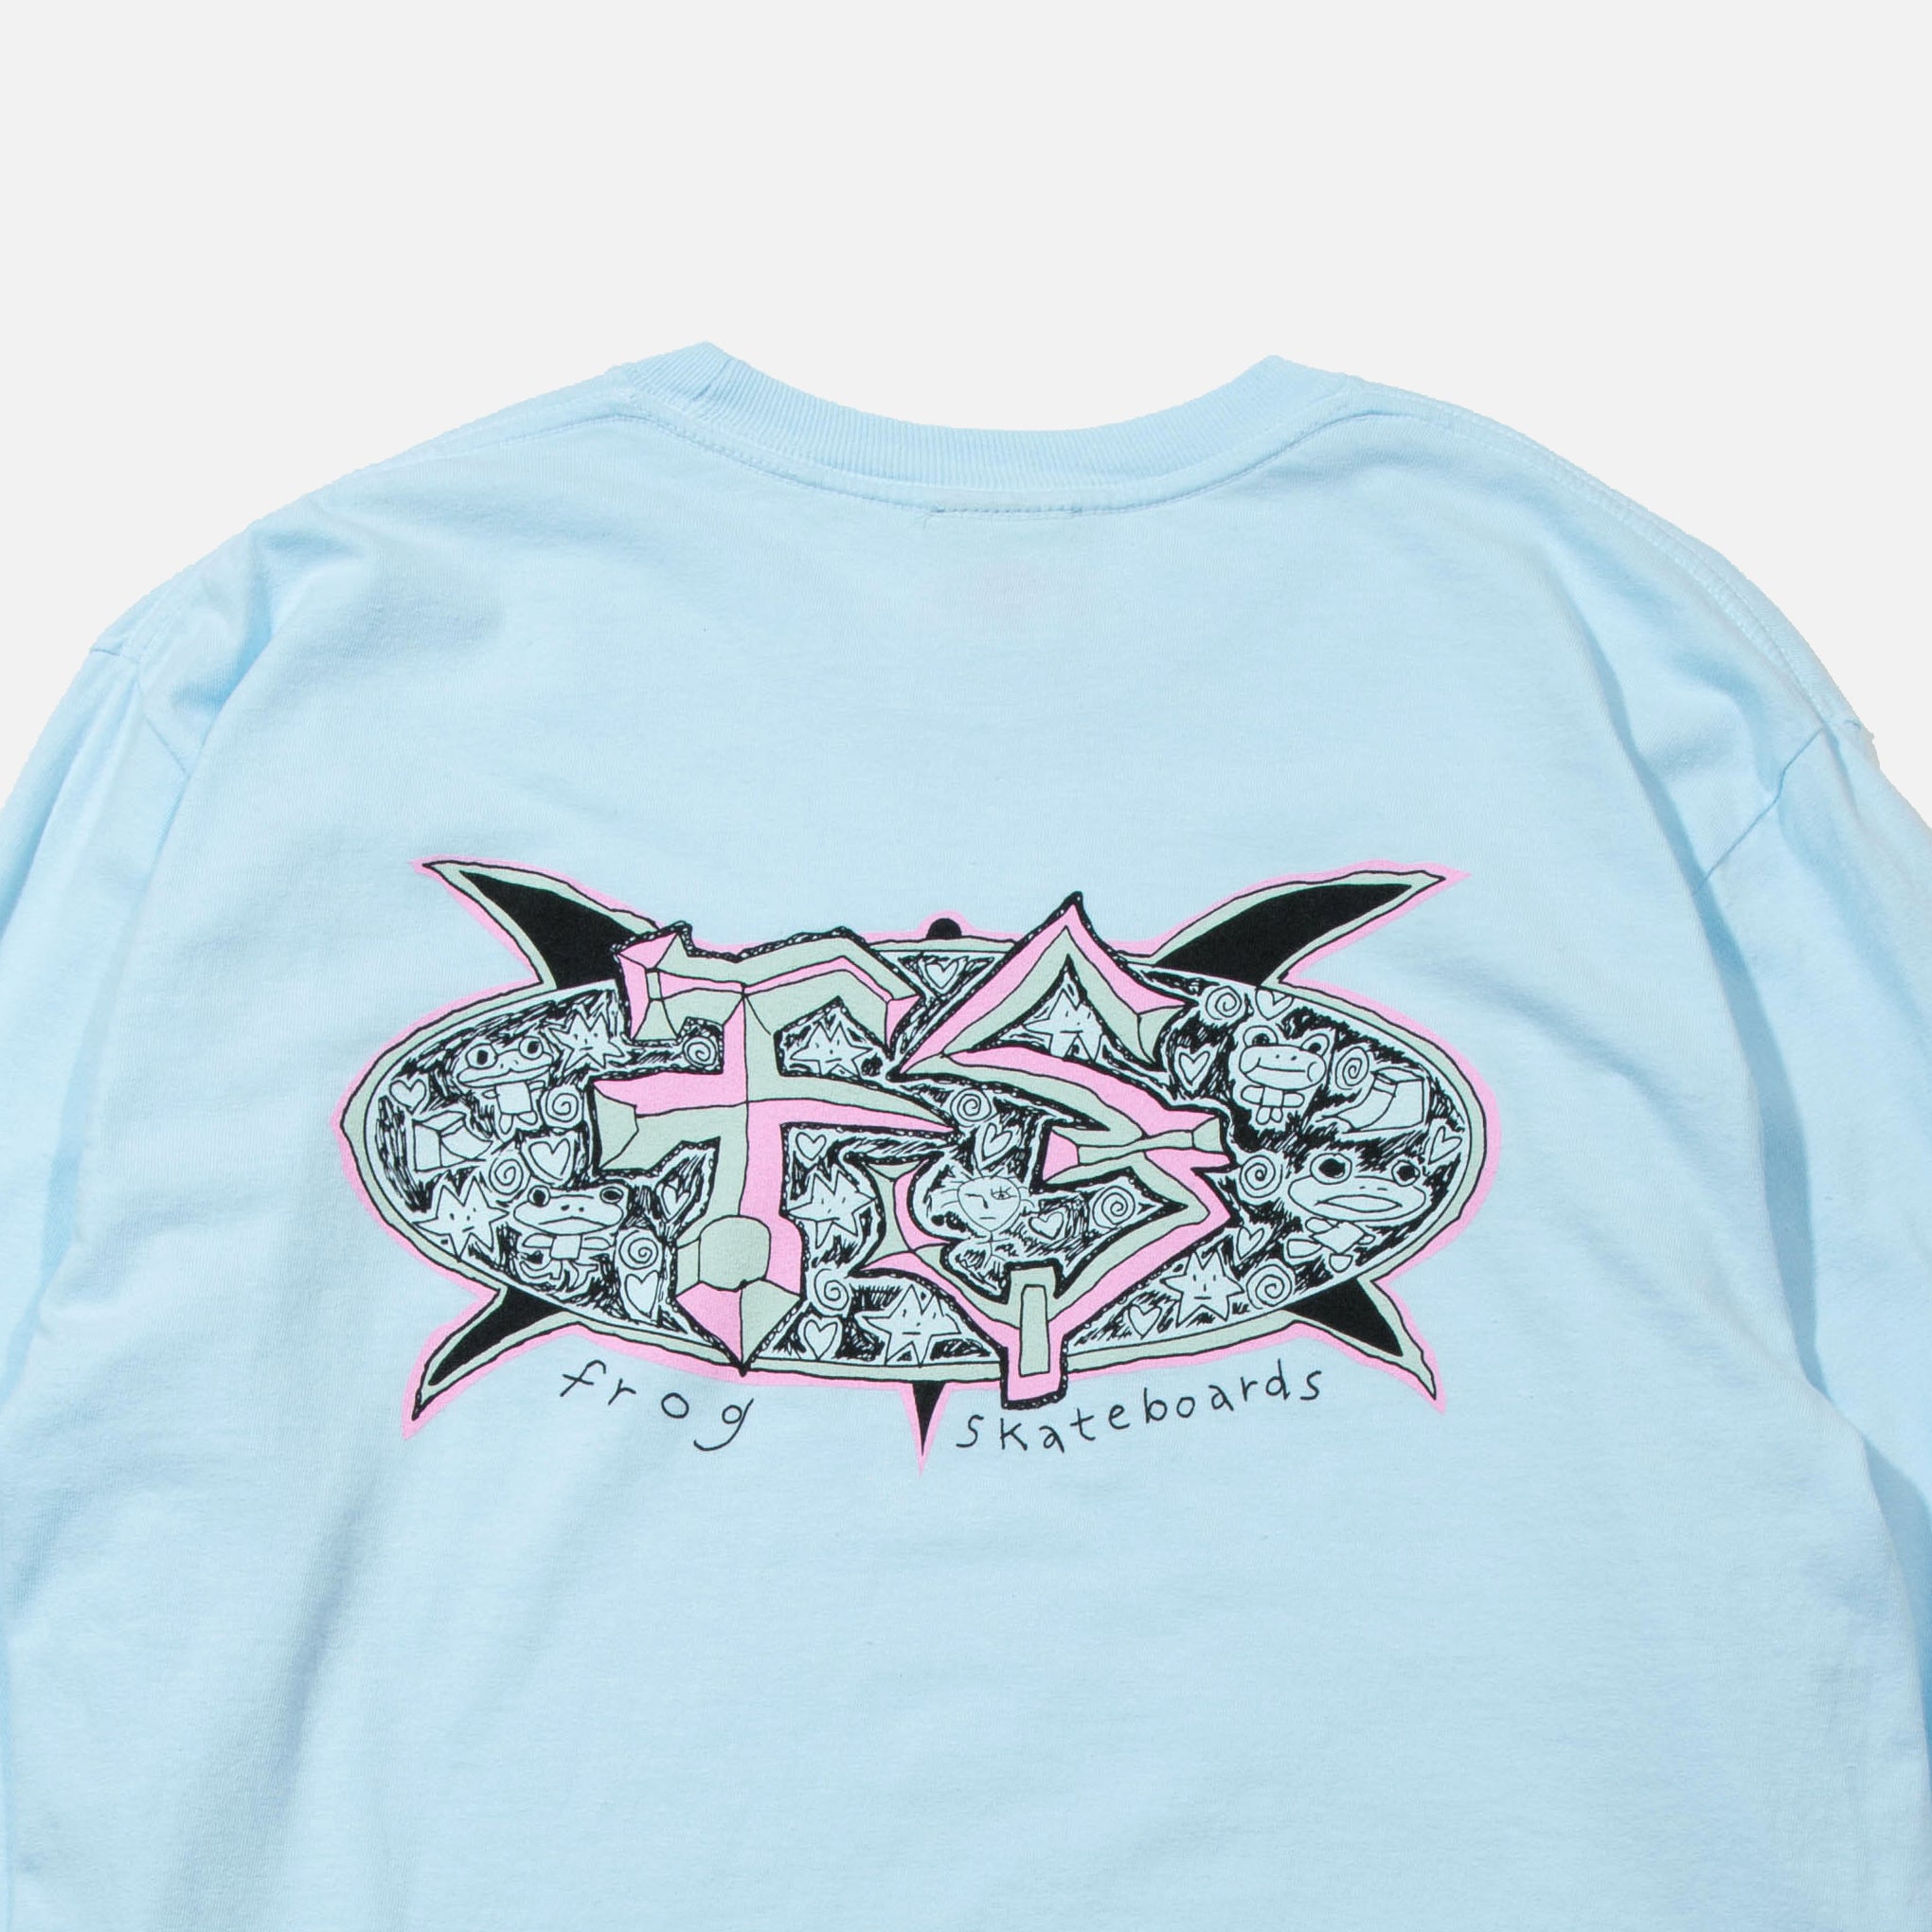 Frog Skateboards T-Shirts L Tシャツ 初期 レア-